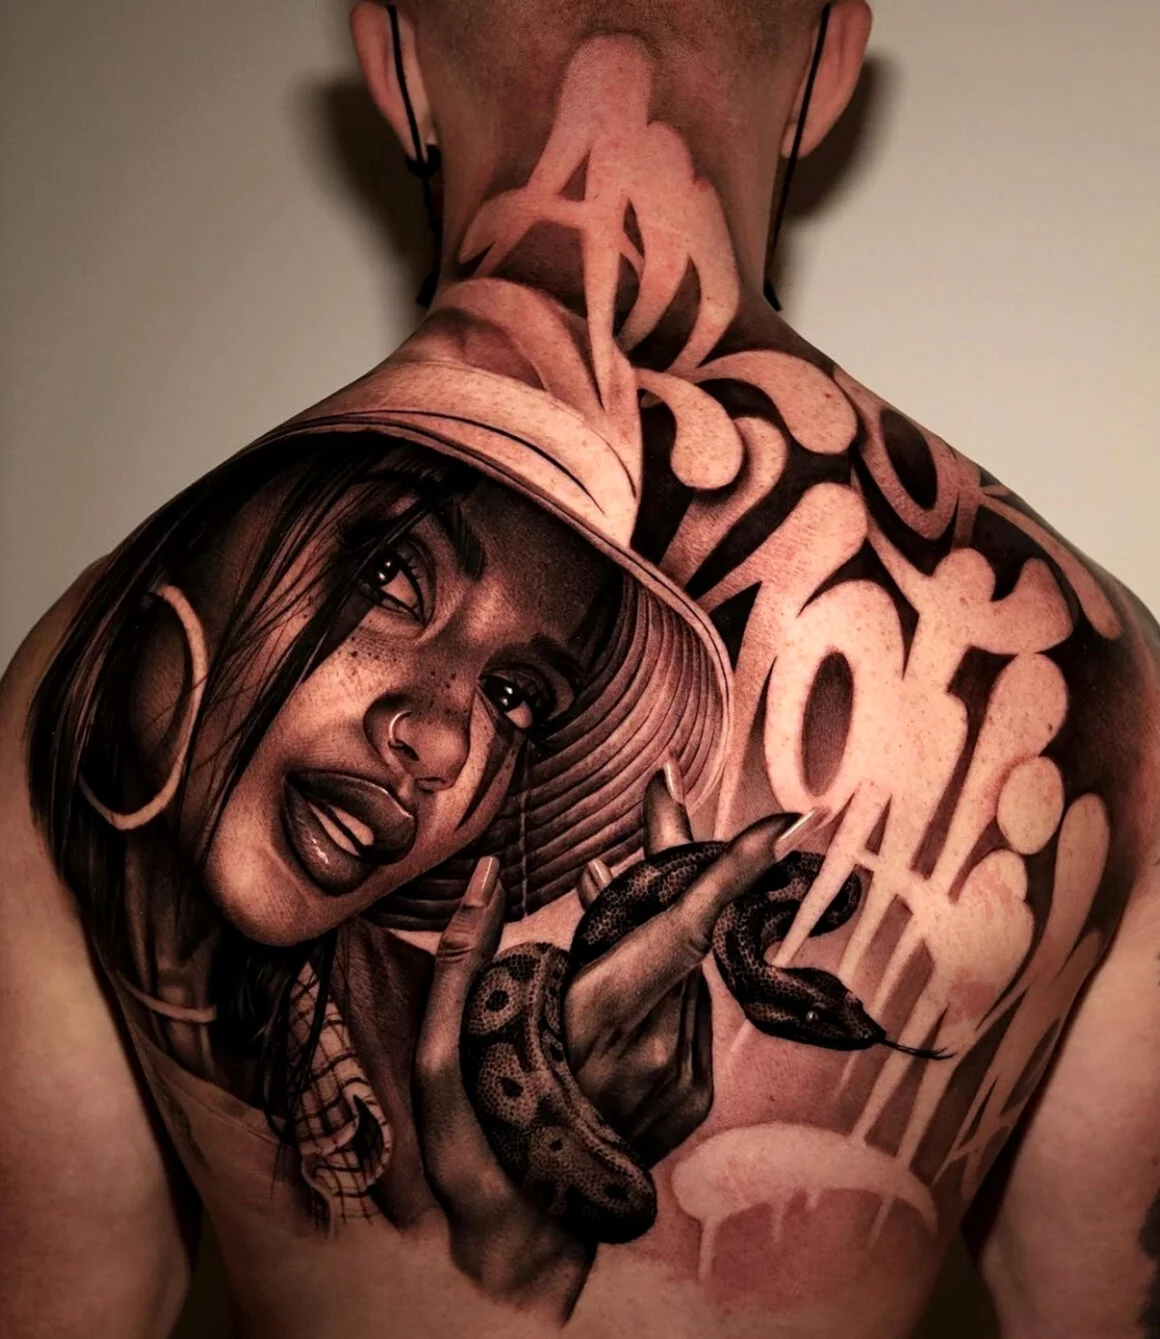 92+ Chicano Tattoos You Need To See! - YouTube